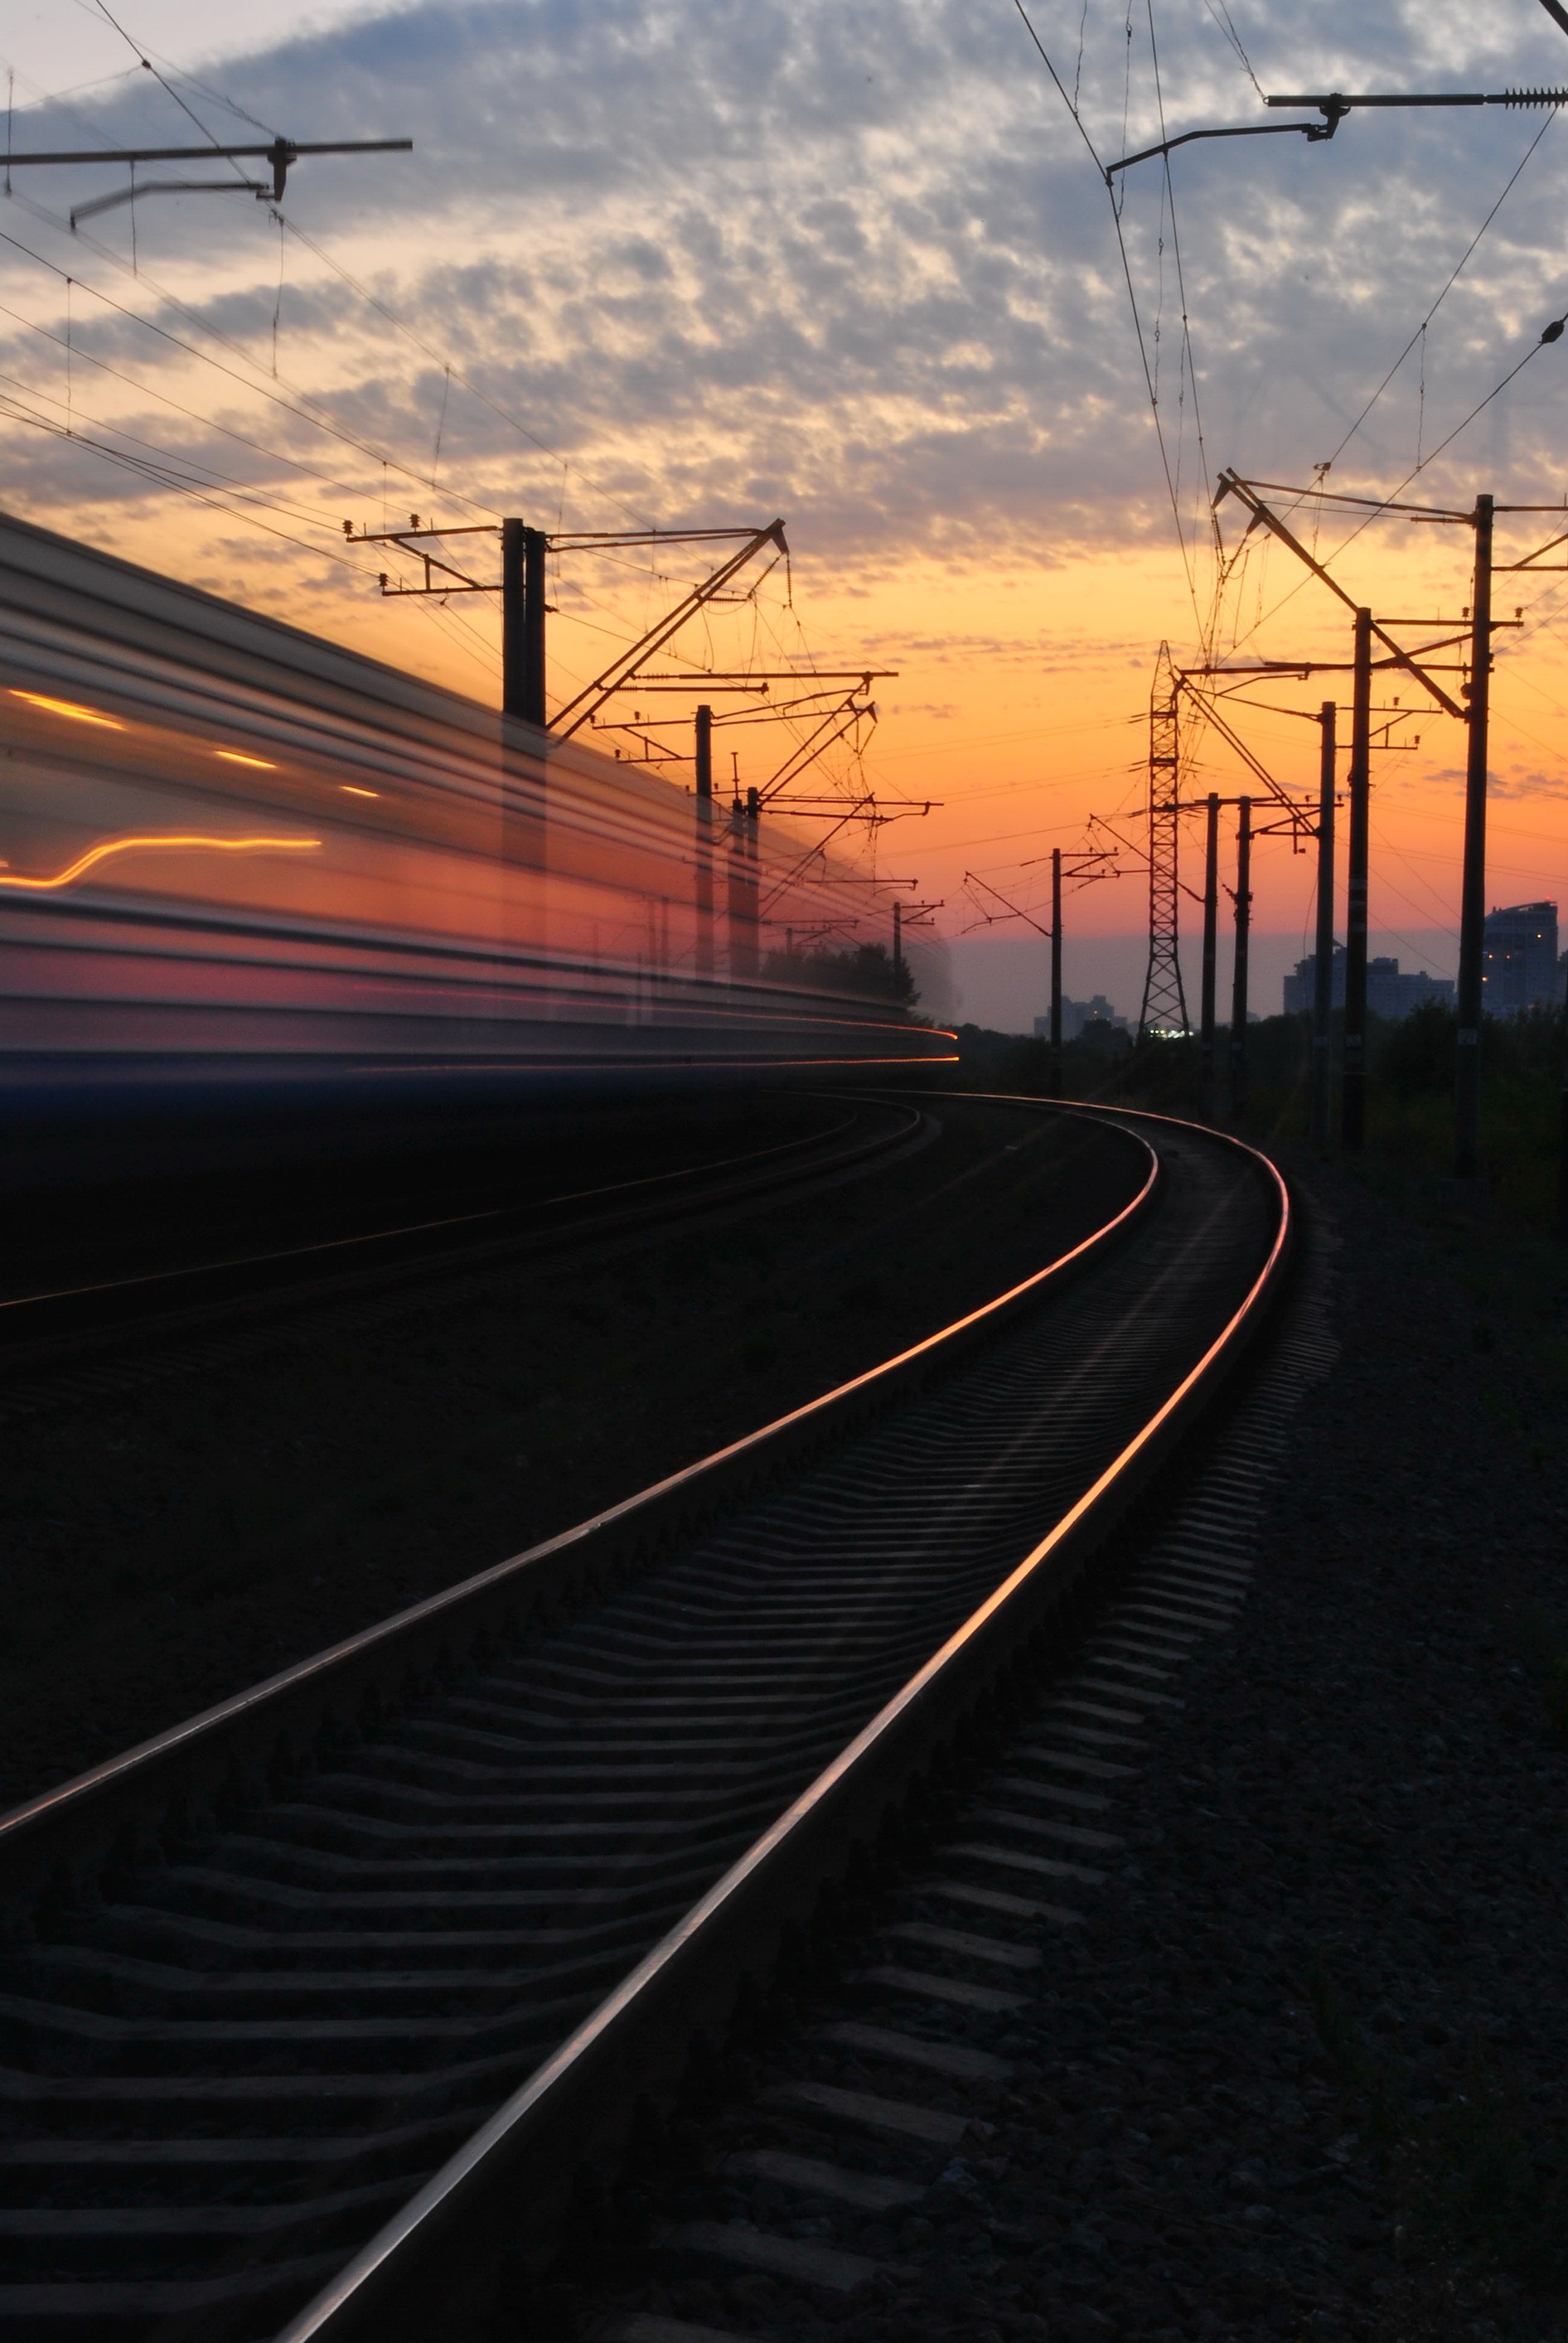 A train blurs at high speed against a sunset in front of electrical towers